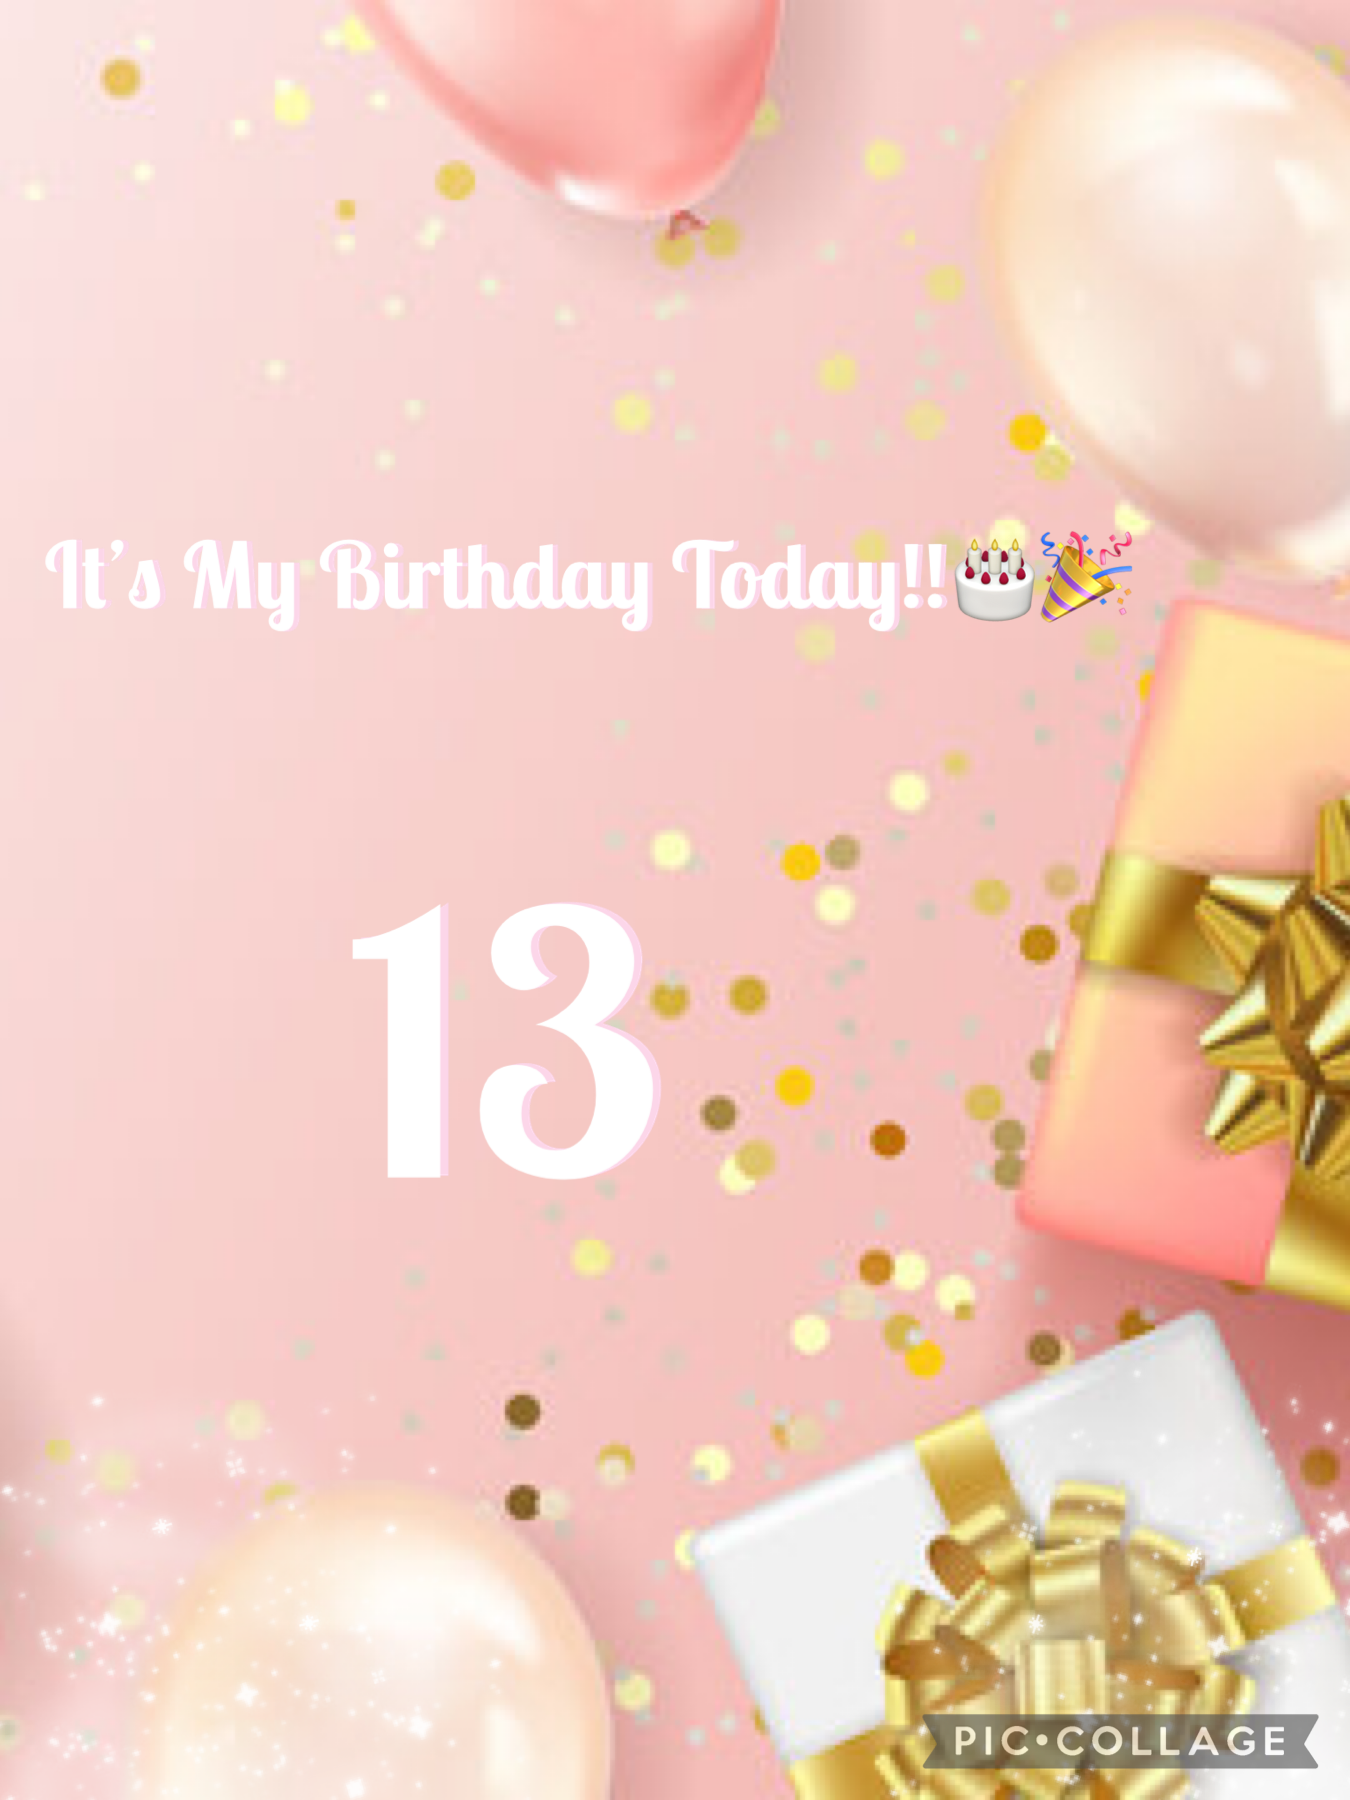 🎉Tap🎉
It’s my 13th birthday today I'm so exited what should my party theme be? Aotd:Maybe Cactus?💗